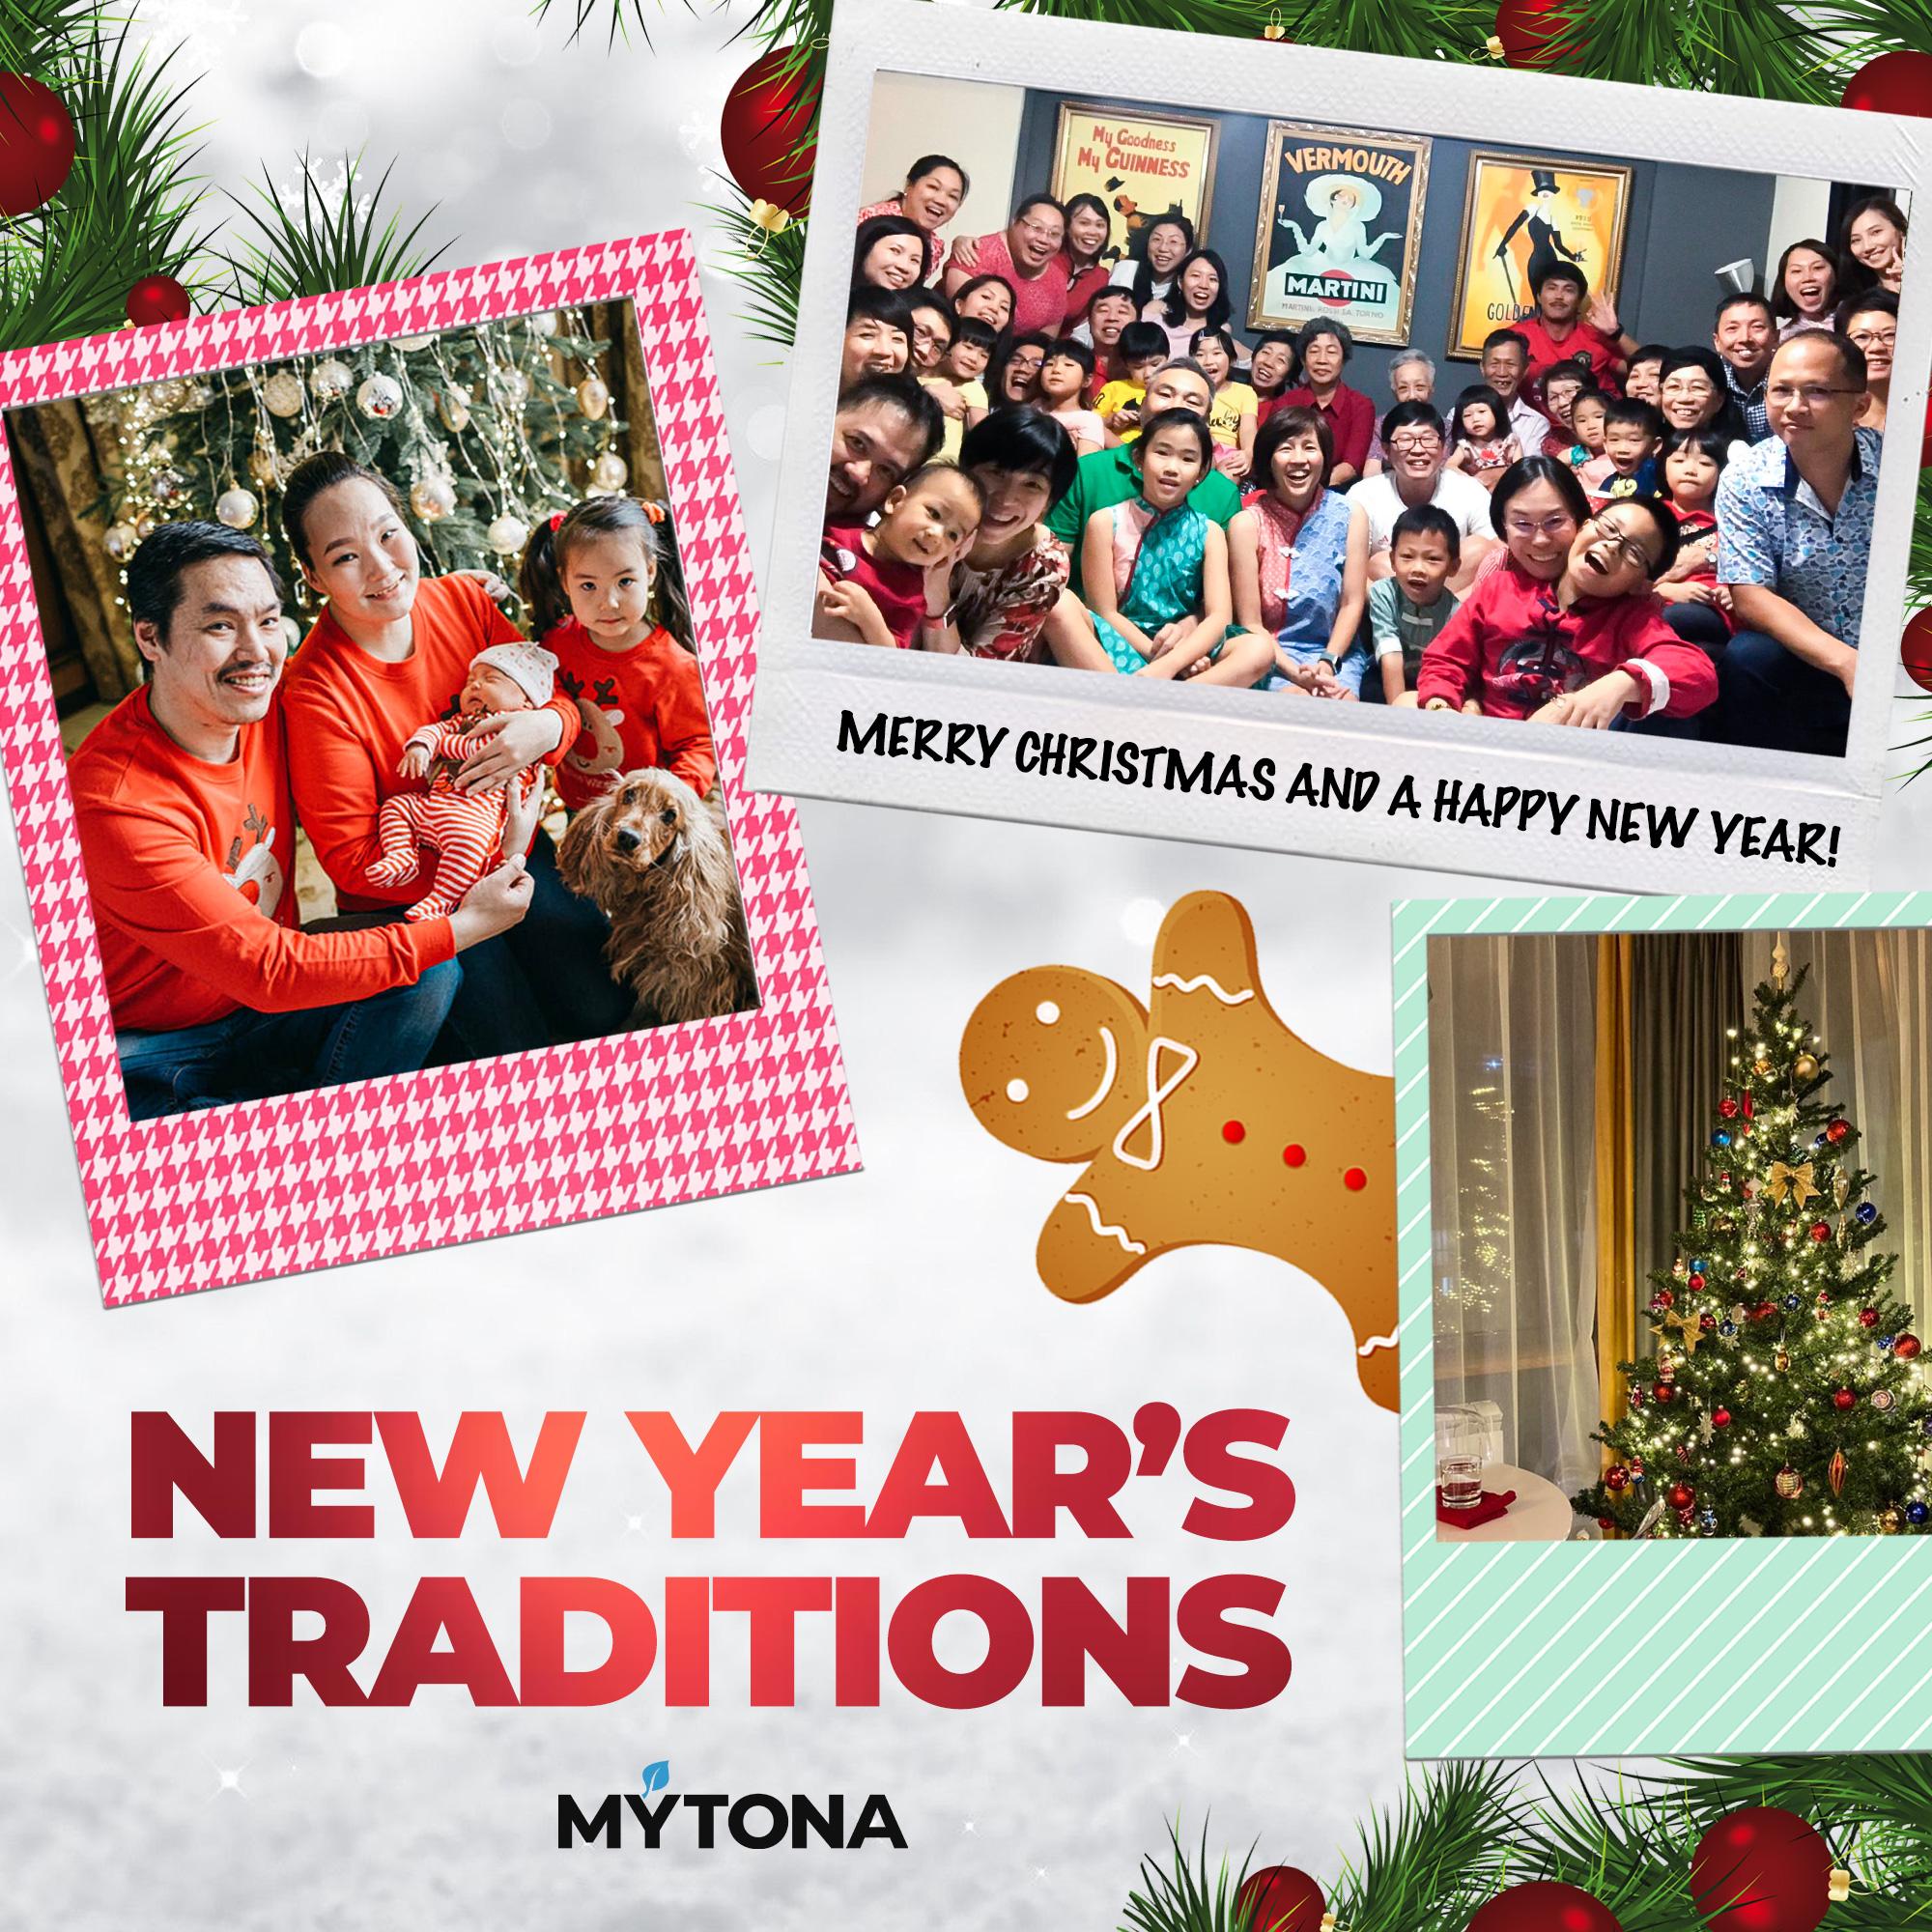 What New Year's traditions do mytonians from around the world have?